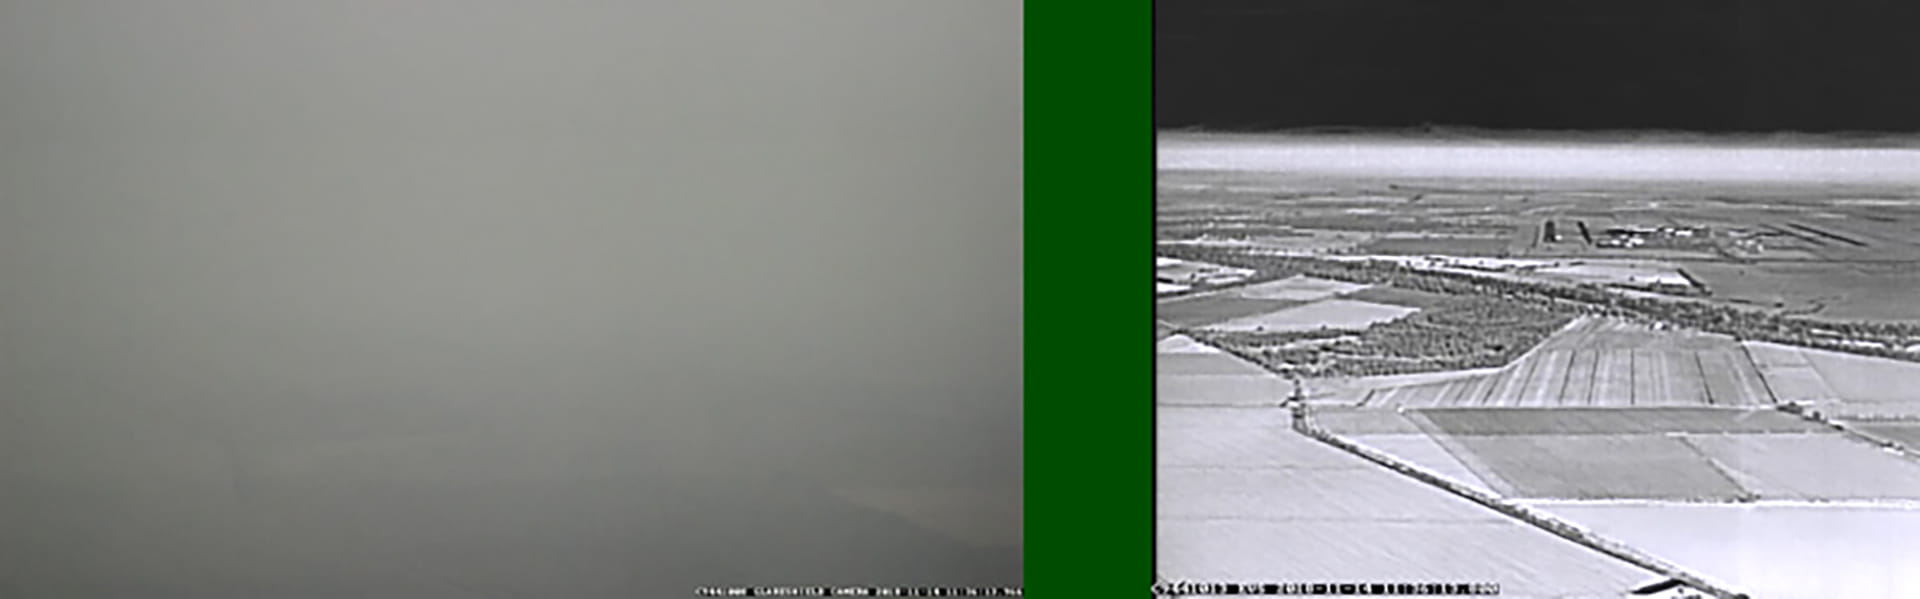 Comparison of a view out the window of an aircraft obscured by smoke and fire vs. the same view through Collins EVS-3600